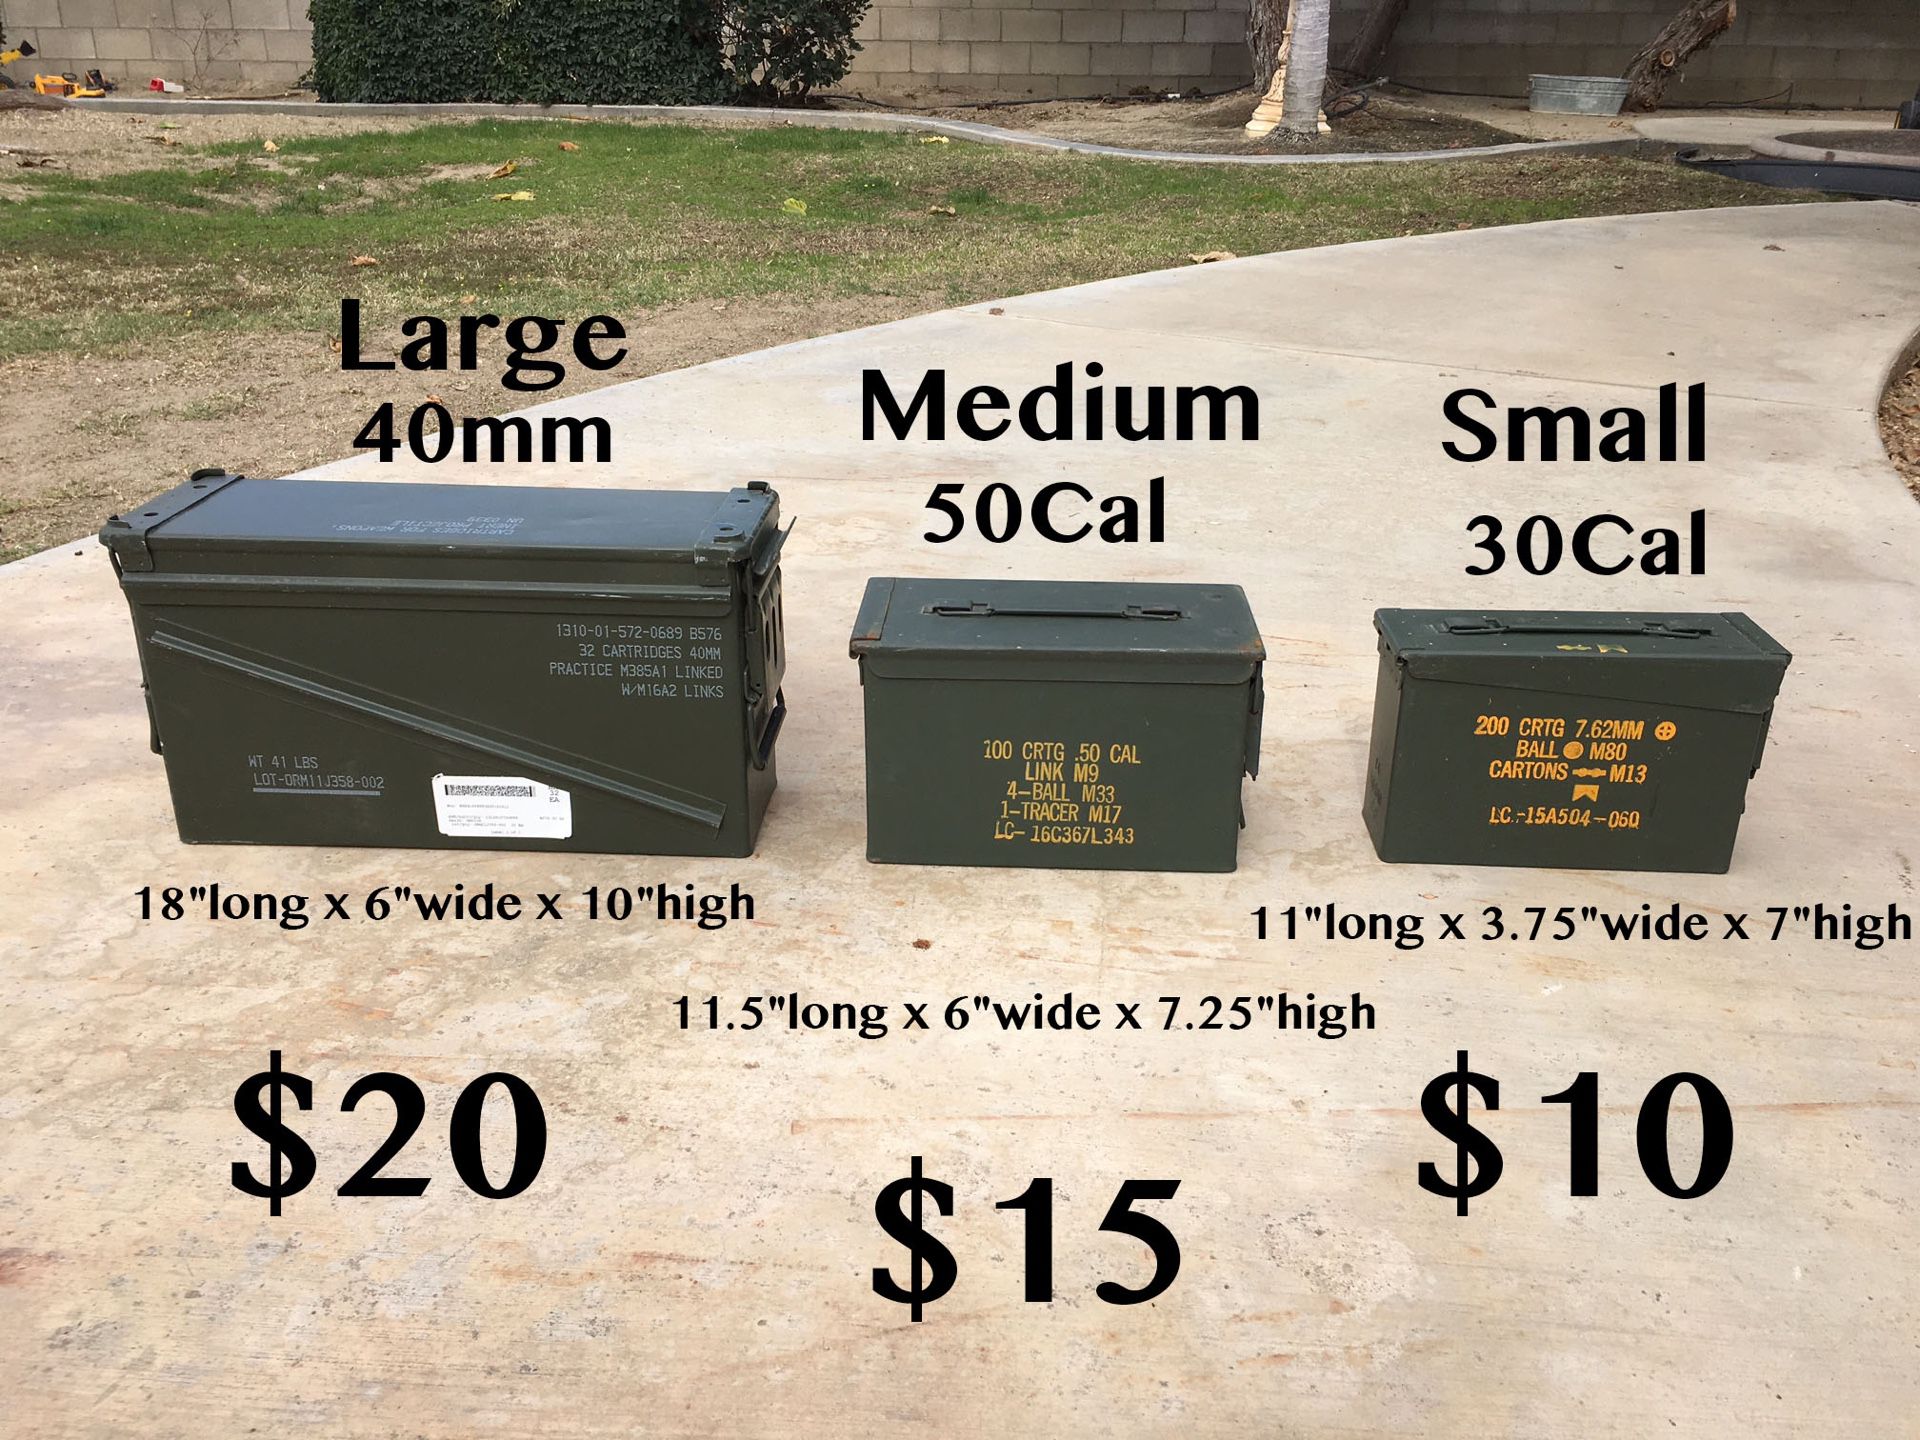 MILITARY 40mm METAL AMMO CAN STORAGE BOX 1310-01-572-0689